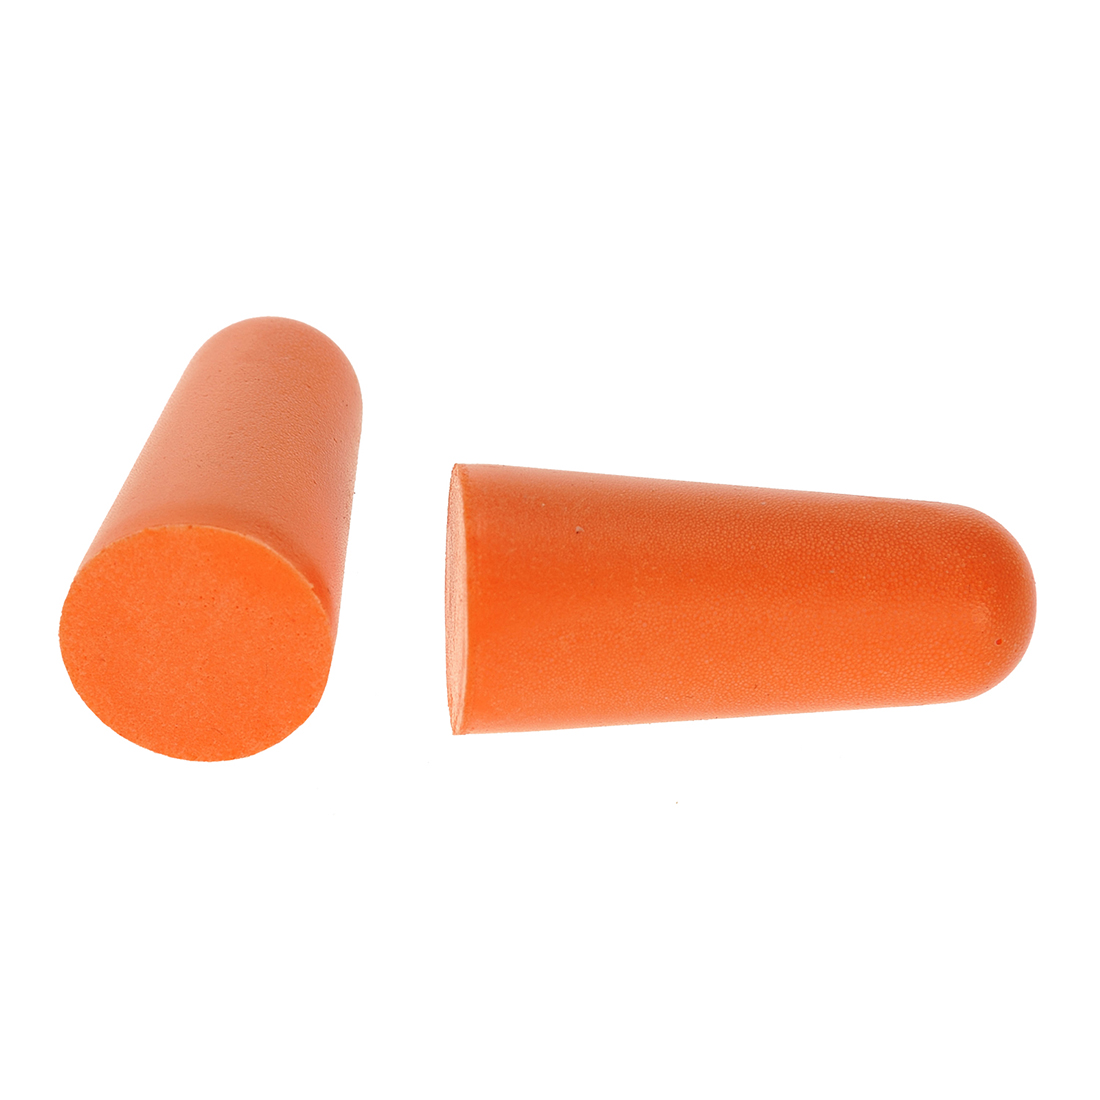 Hearing Protection, Ear Plugs